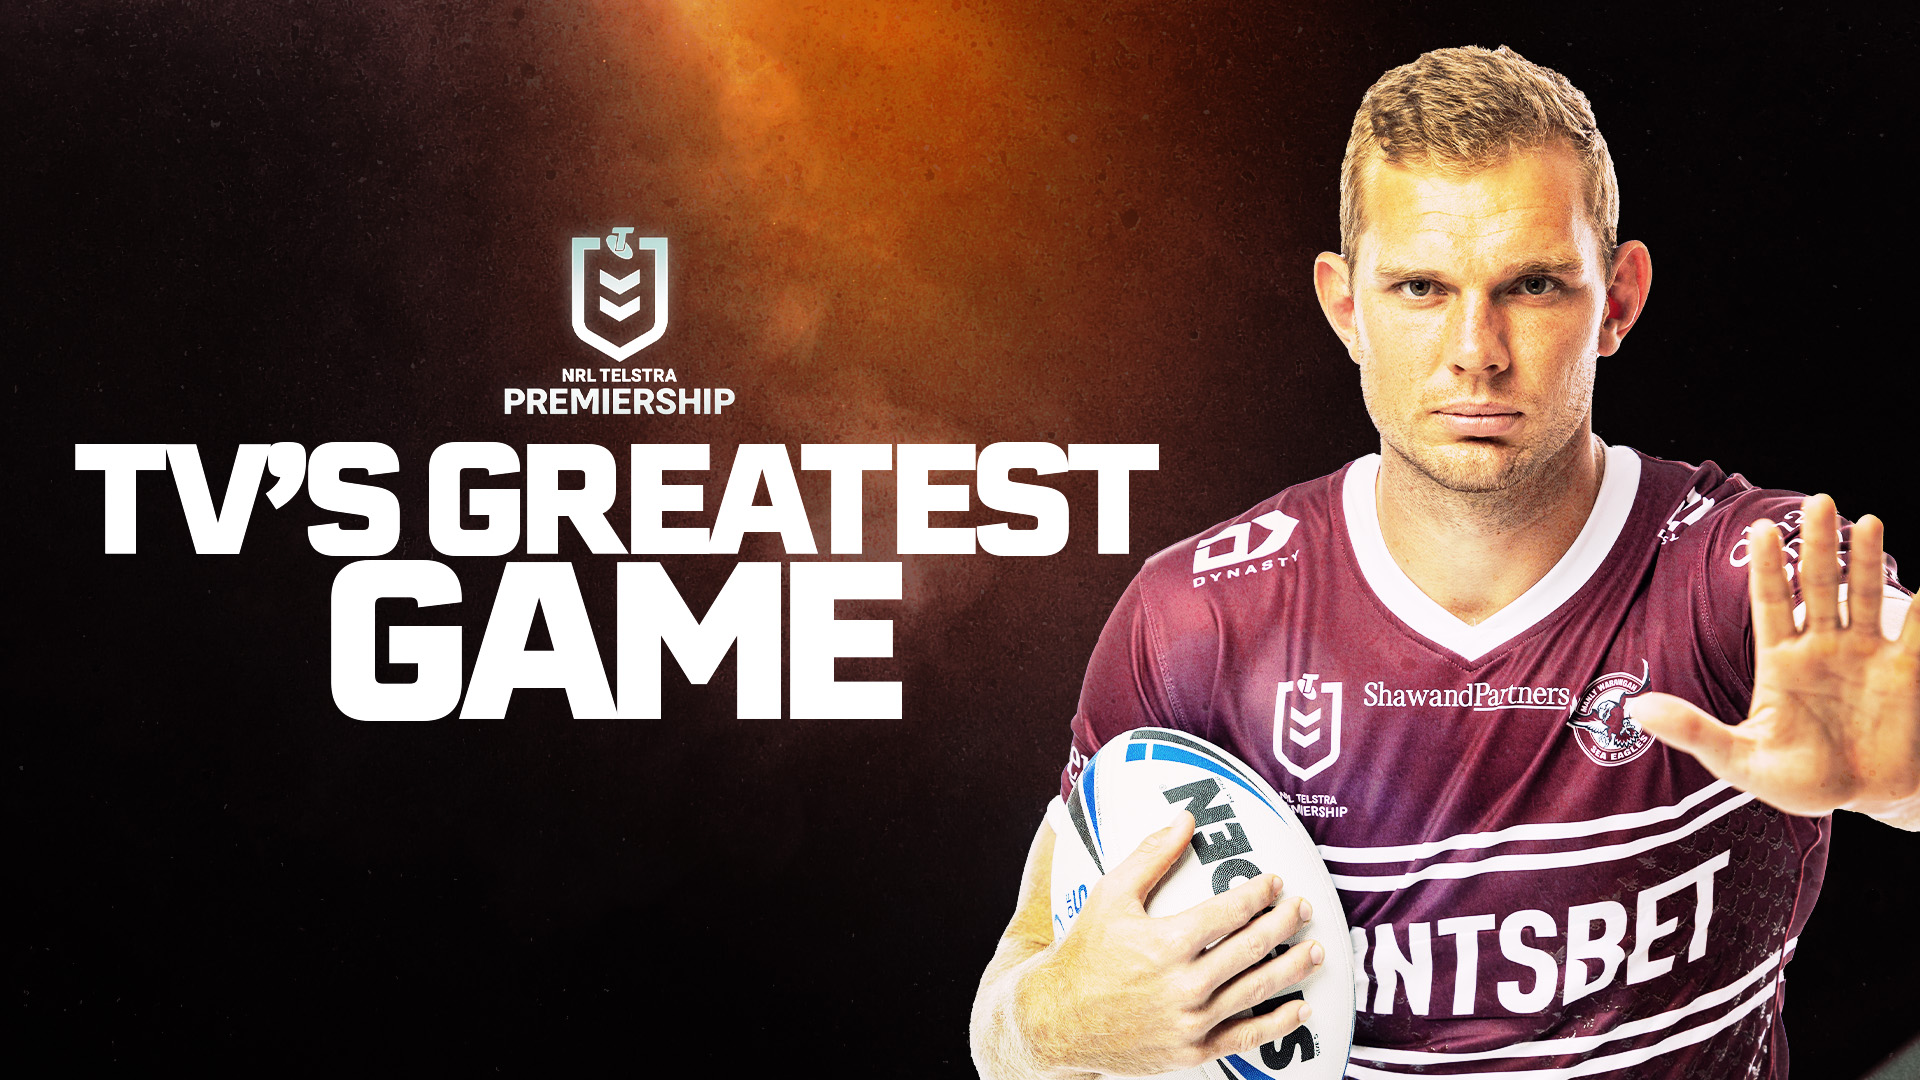 Watch NRL Saturday Night Footy live or on-demand Freeview Australia